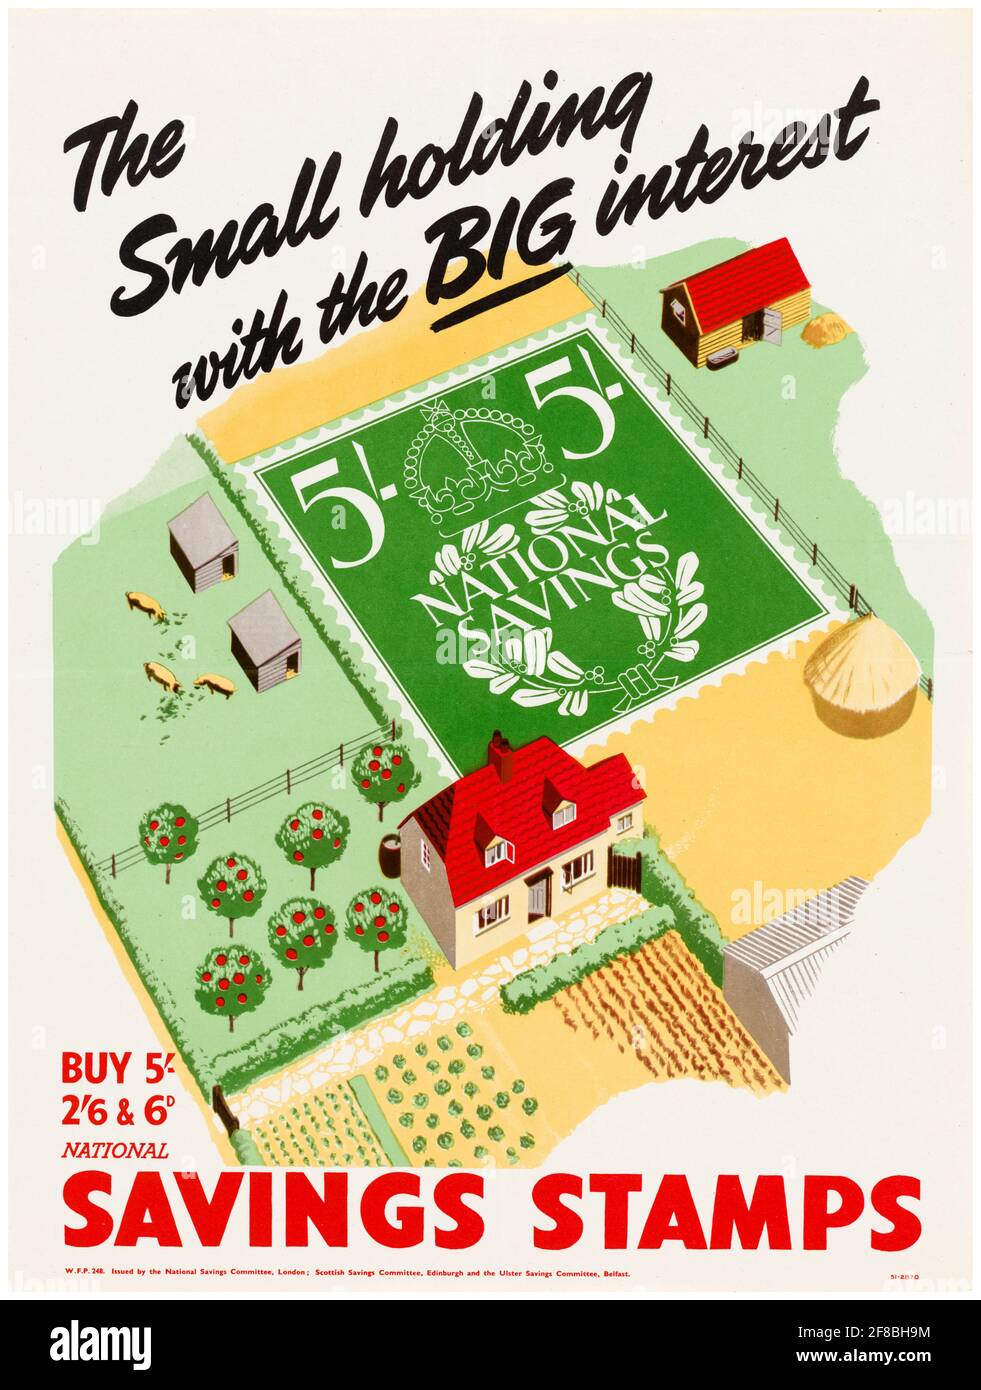 Britisch, WW2 National Savings Poster: The Small Holding with the Big Interest (Savings Stamp Garden), 1942-1945 Stockfoto